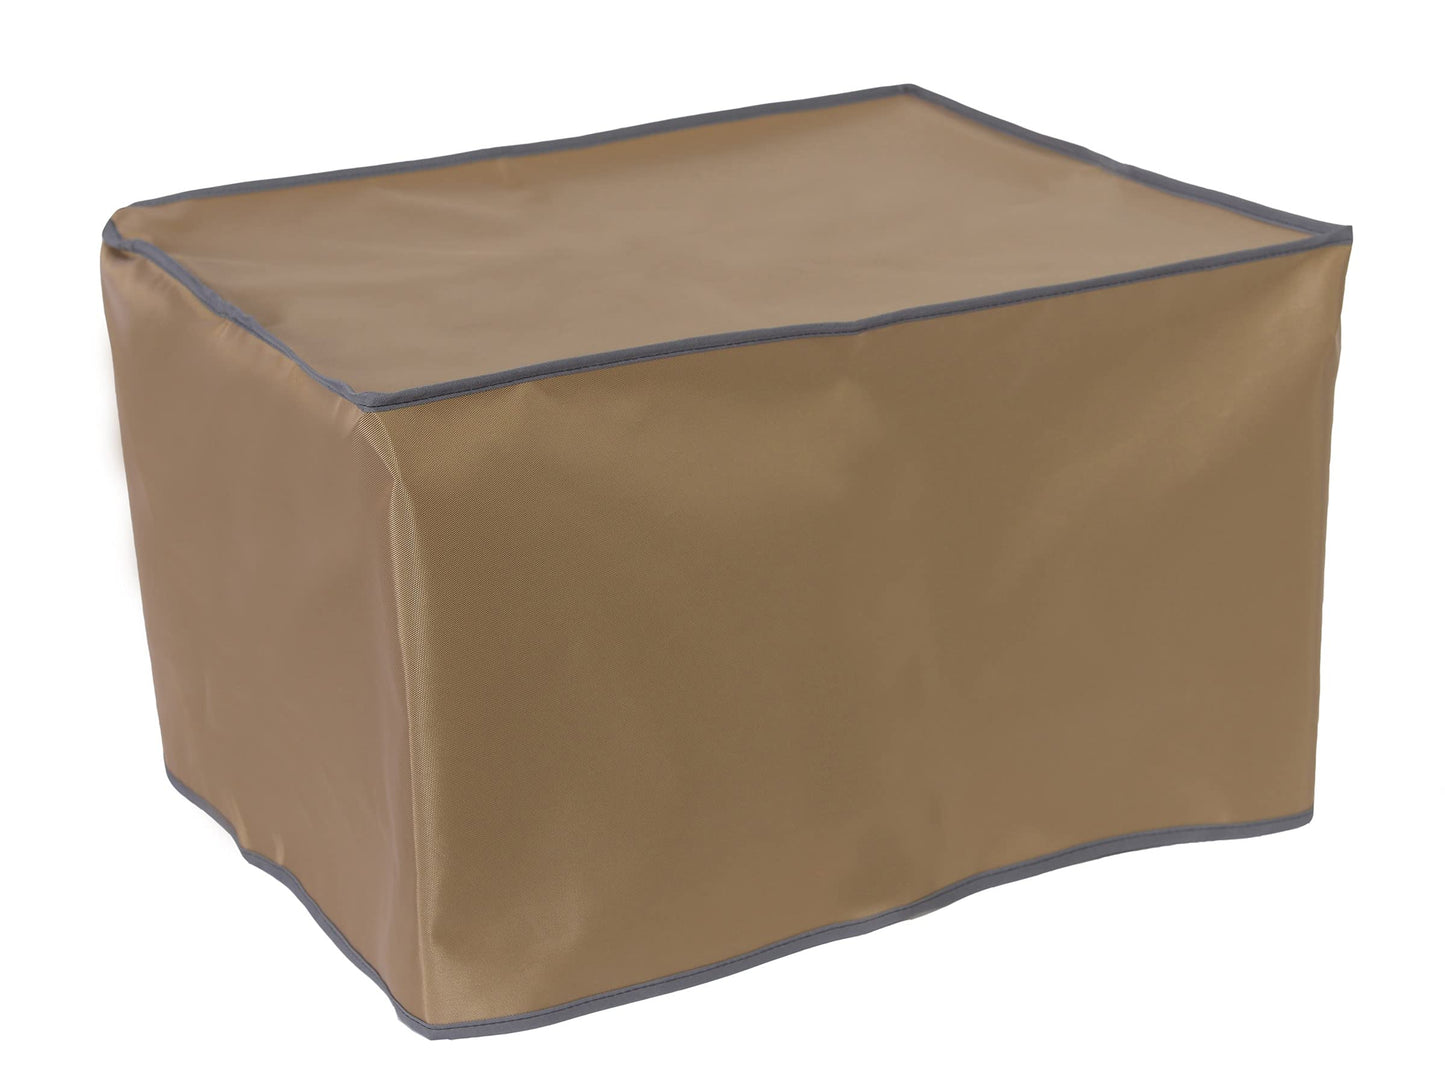 The Perfect Dust Cover, Tan Nylon Cover Compatible with HP Stitch S300 64-in Dye-Sublimation Printer, Anti Static and Waterproof Cover, Dimensions 101''W x 28''D x 54''H by The Perfect Dust Cover